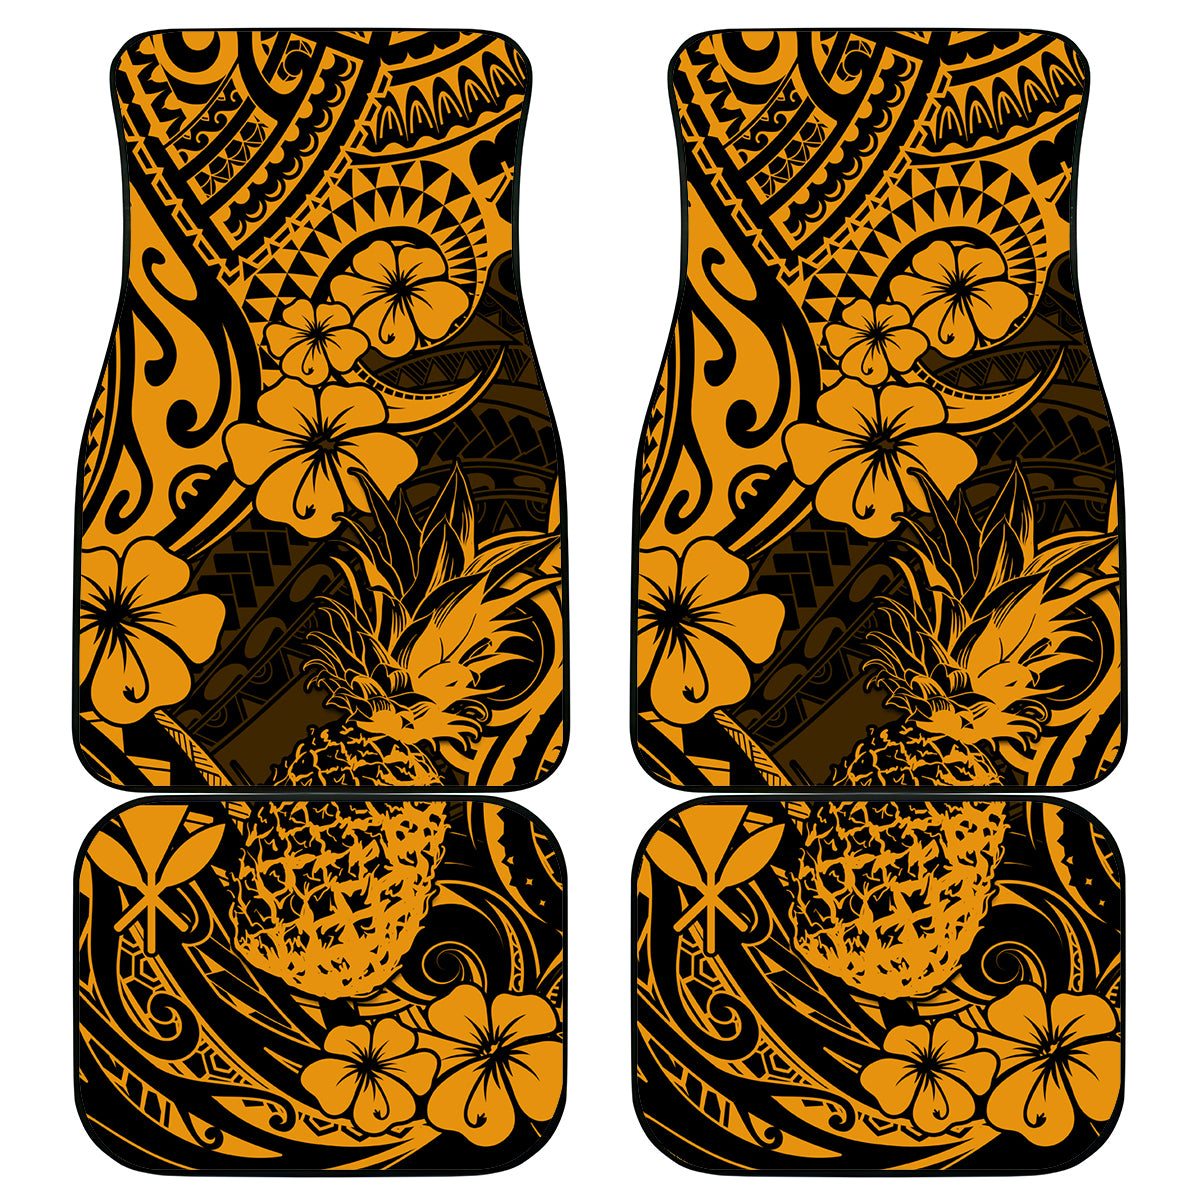 Hawaii Pineapple Car Mats Paradise Flowers Pacific With Gold Polynesian Tribal LT01 Gold - Polynesian Pride